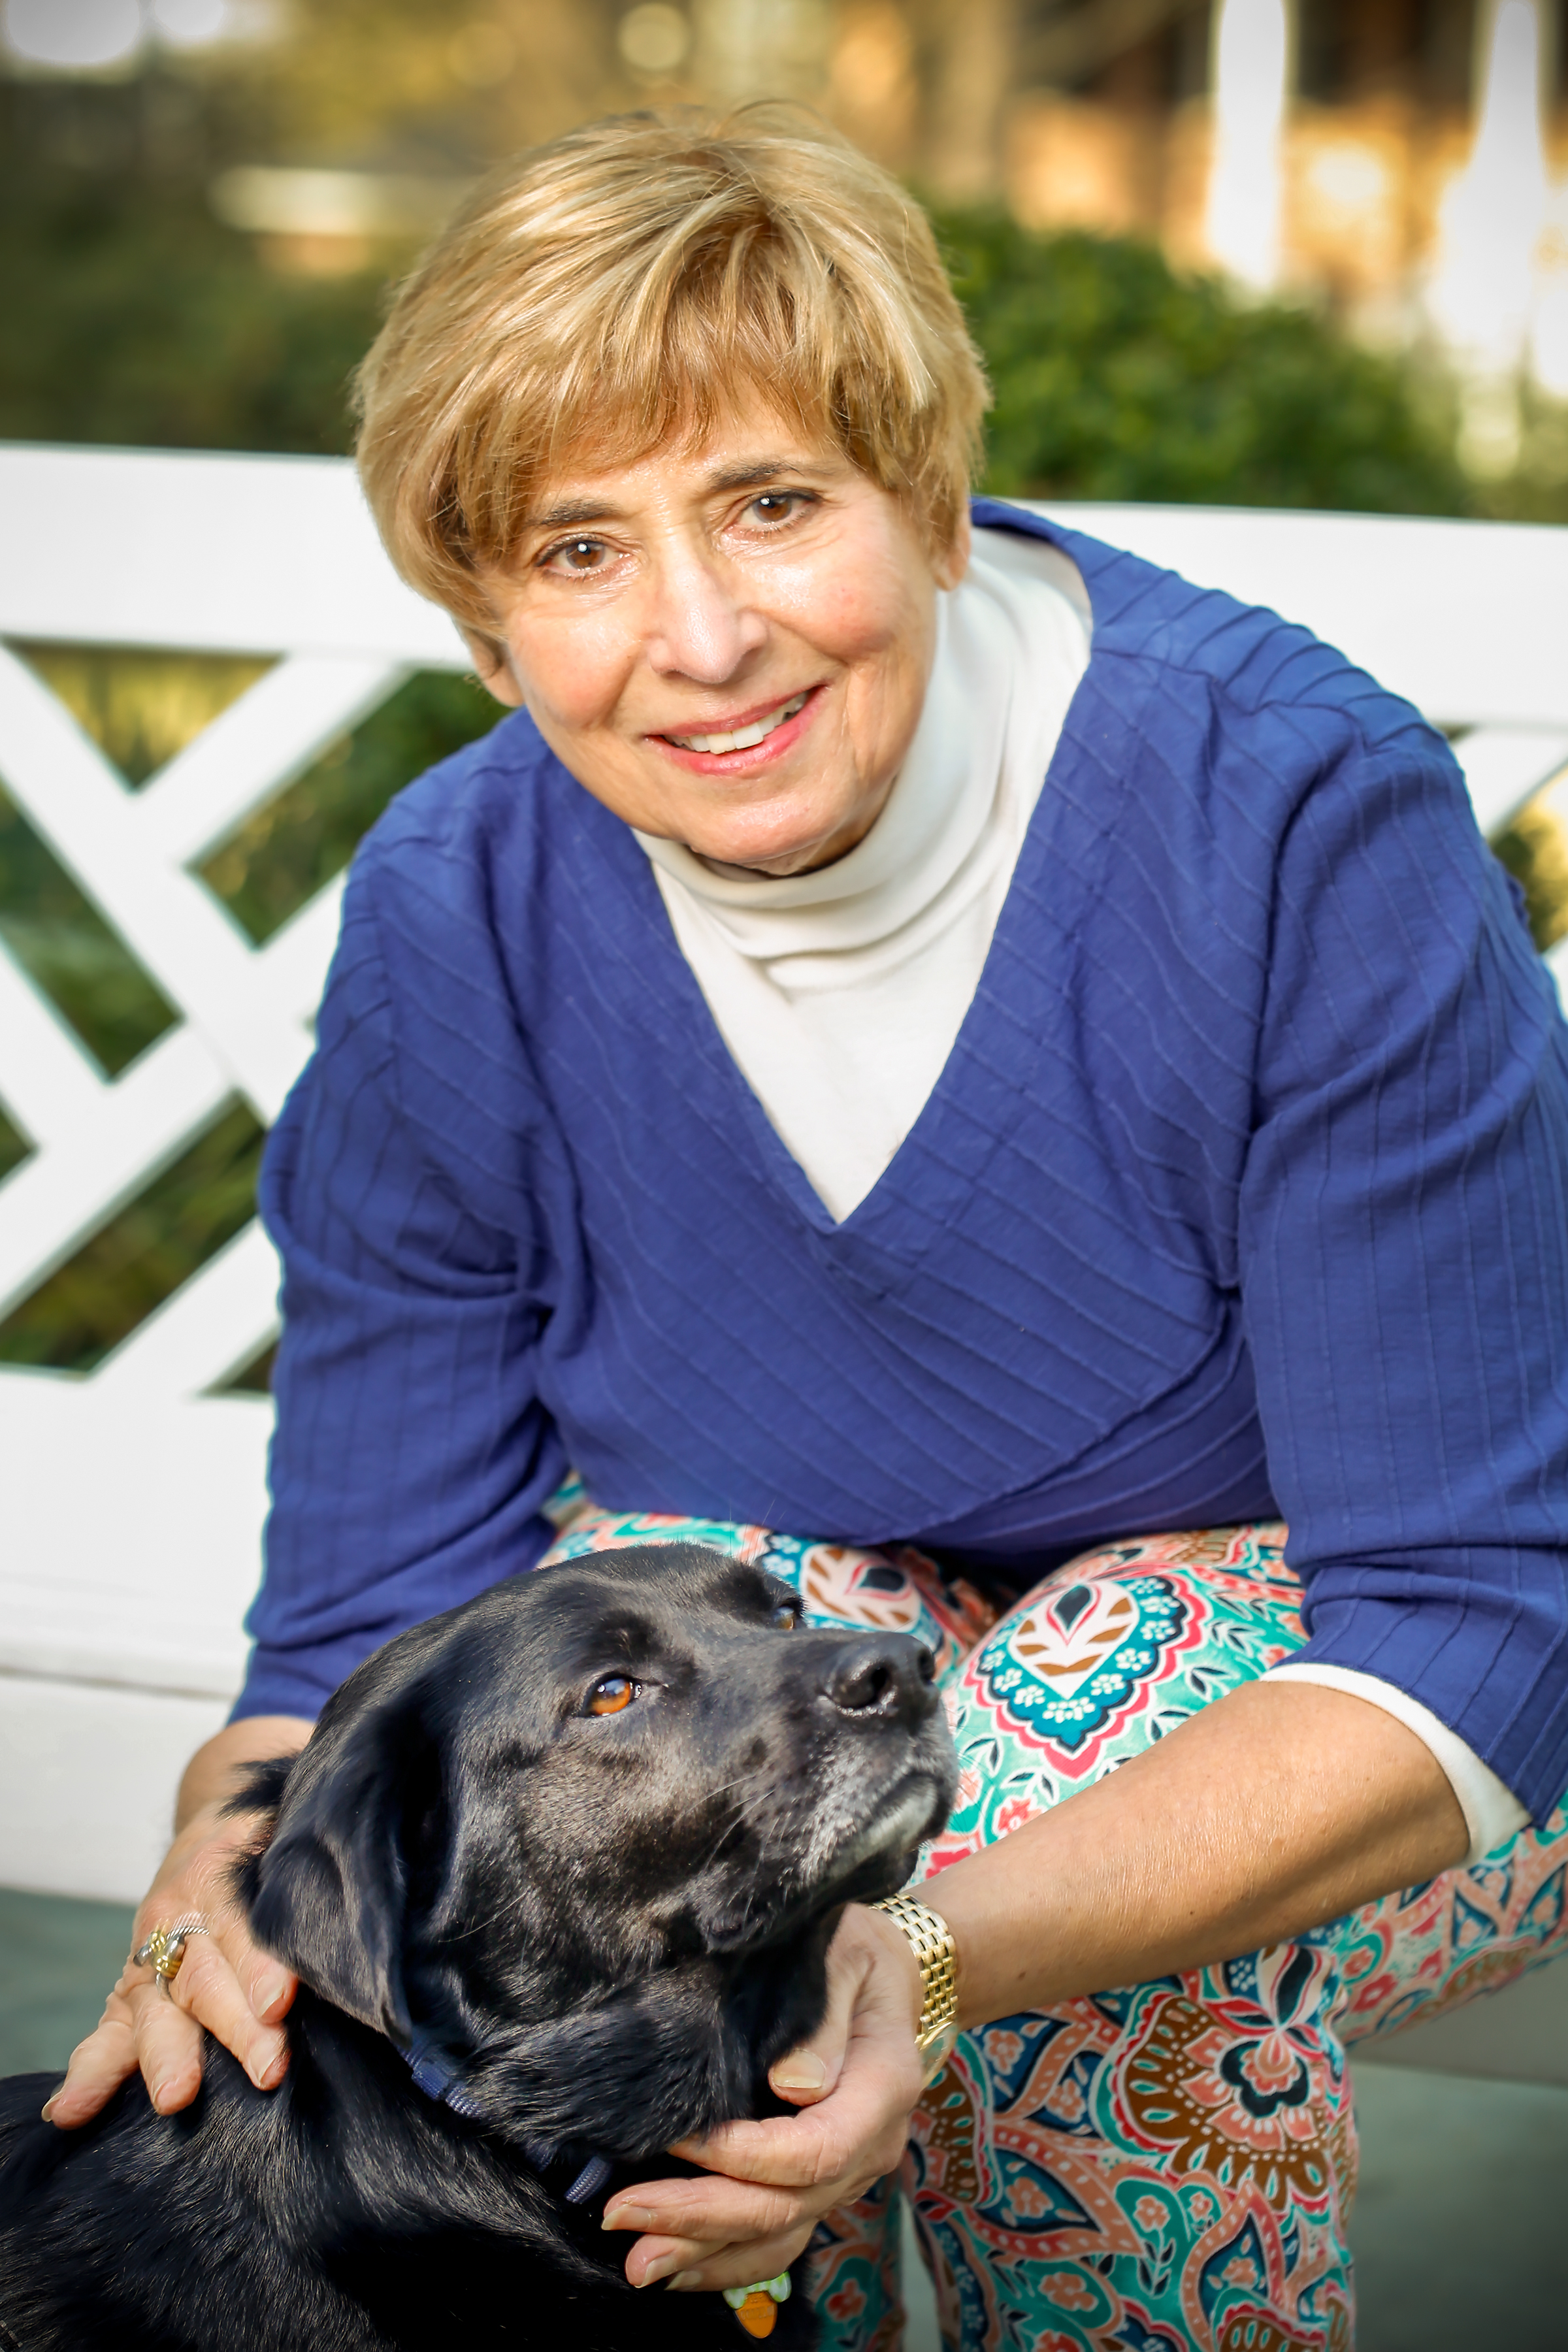 Toby was an abandoned male black lab mix left to fend for himself in an area that was open to the elements. After medical treatment, he was adopted by Linda Ackerman. The assurance of security and safety that she provides has helped him blossom into a beloved best friend!